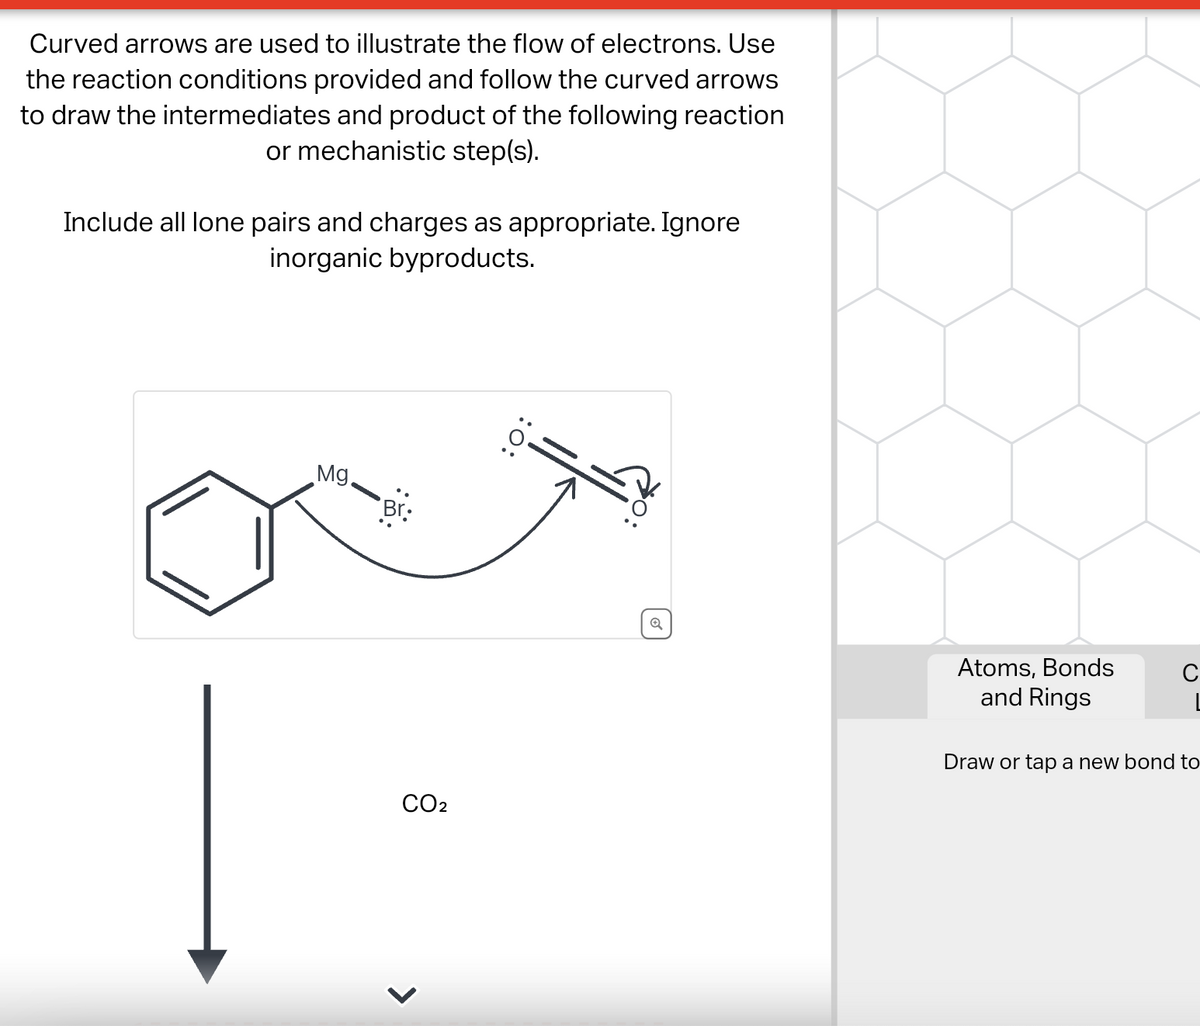 Curved arrows are used to illustrate the flow of electrons. Use
the reaction conditions provided and follow the curved arrows
to draw the intermediates and product of the following reaction
or mechanistic step(s).
Include all lone pairs and charges as appropriate. Ignore
inorganic byproducts.
Mg.
Br:
CO₂
>
:O:
Q
Atoms, Bonds
and Rings
Draw or tap a new bond to